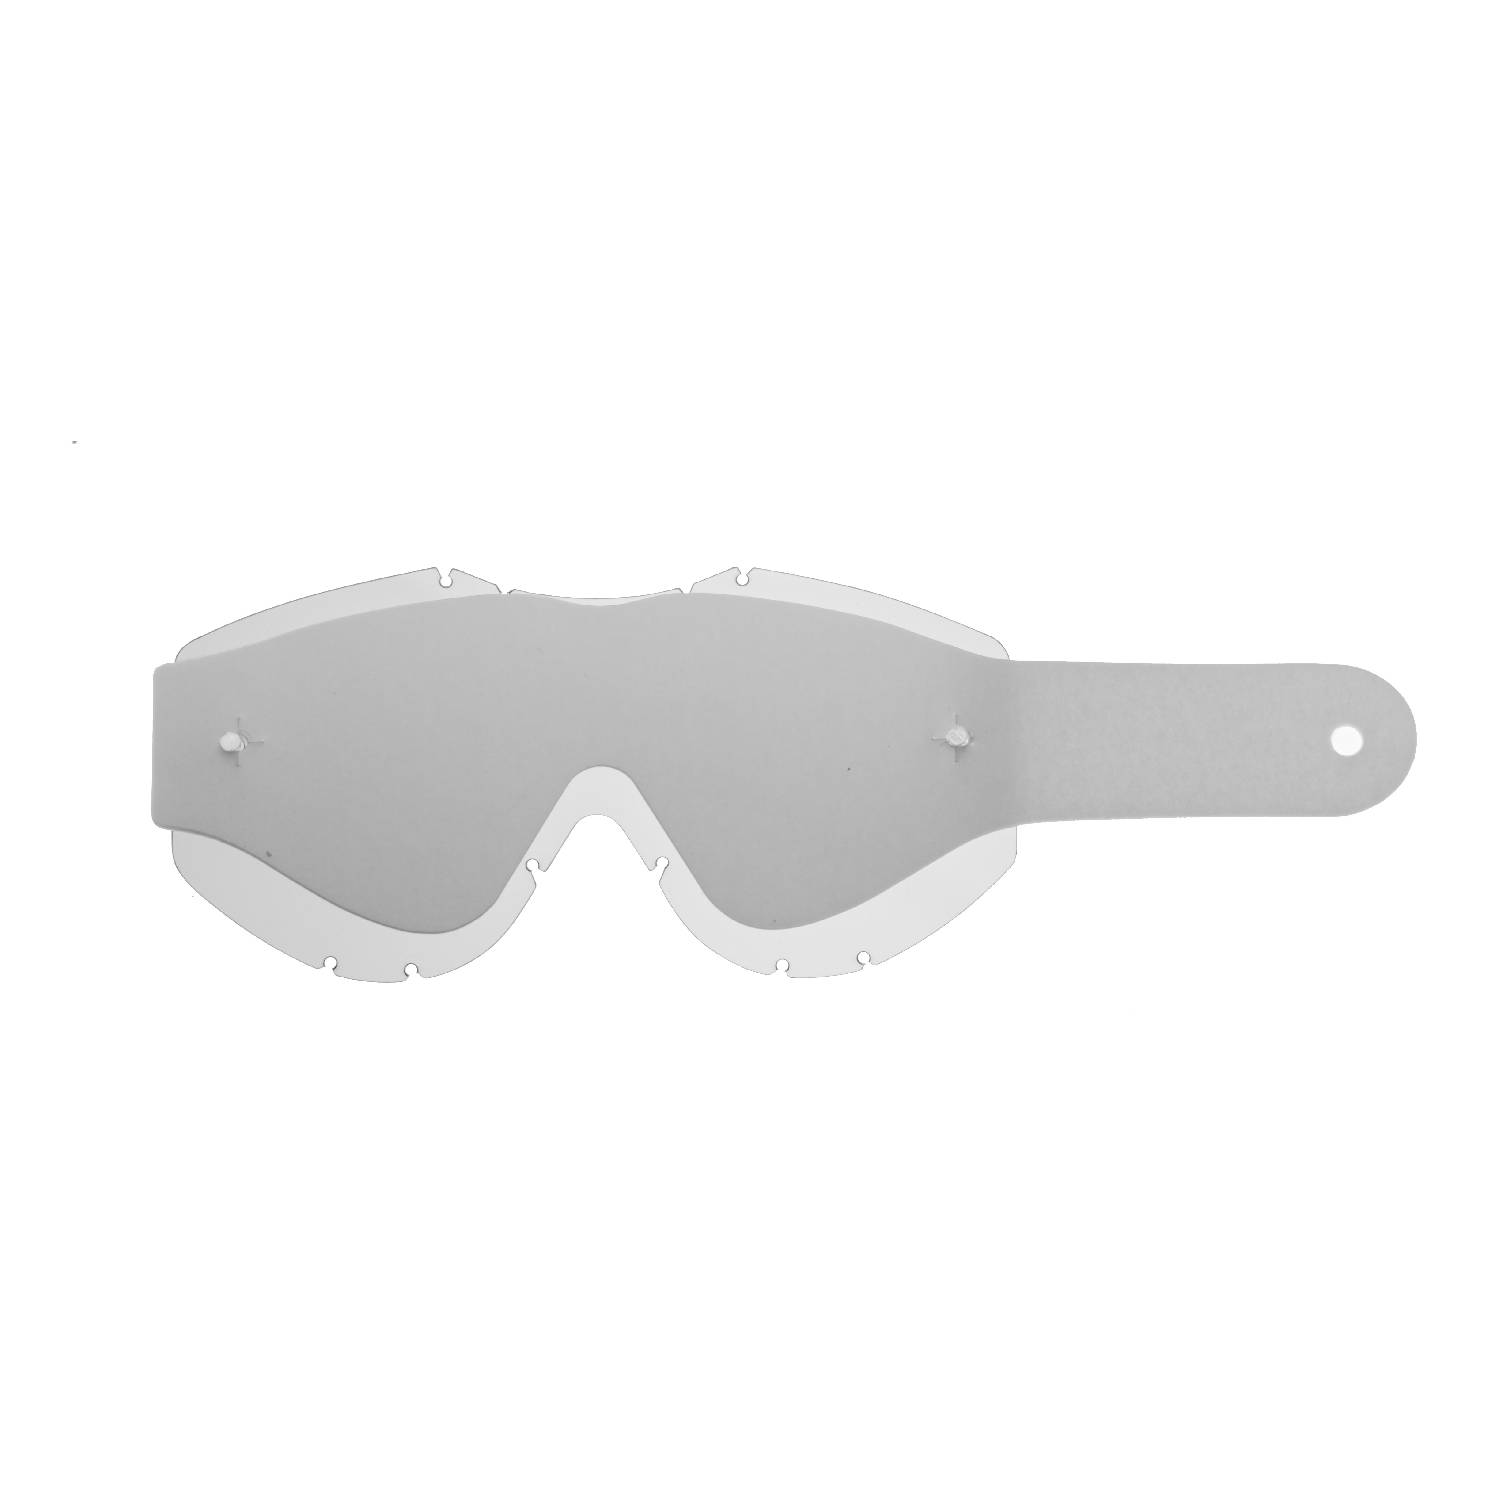 combo lenses with clear lenses with 10 tear off compatible for Uvex Mx goggle